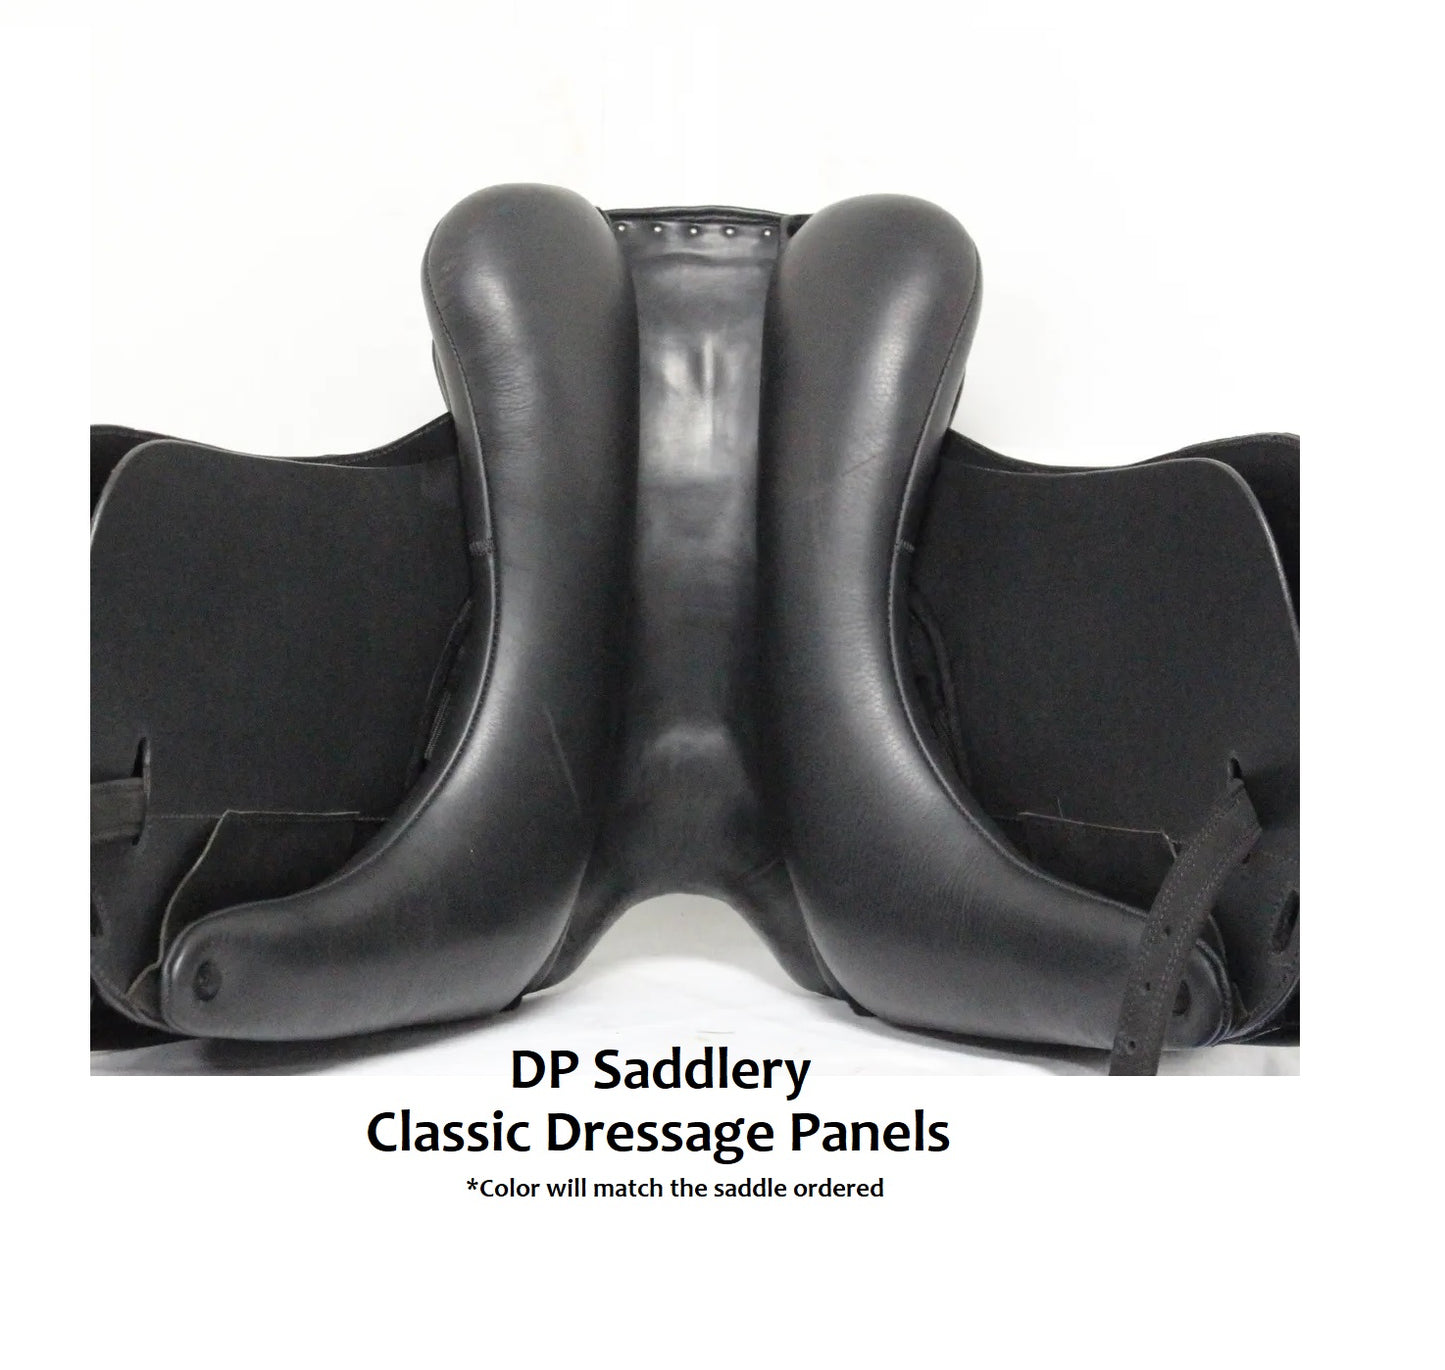 DP Saddlery Classic Dressage 6453 17.5 in